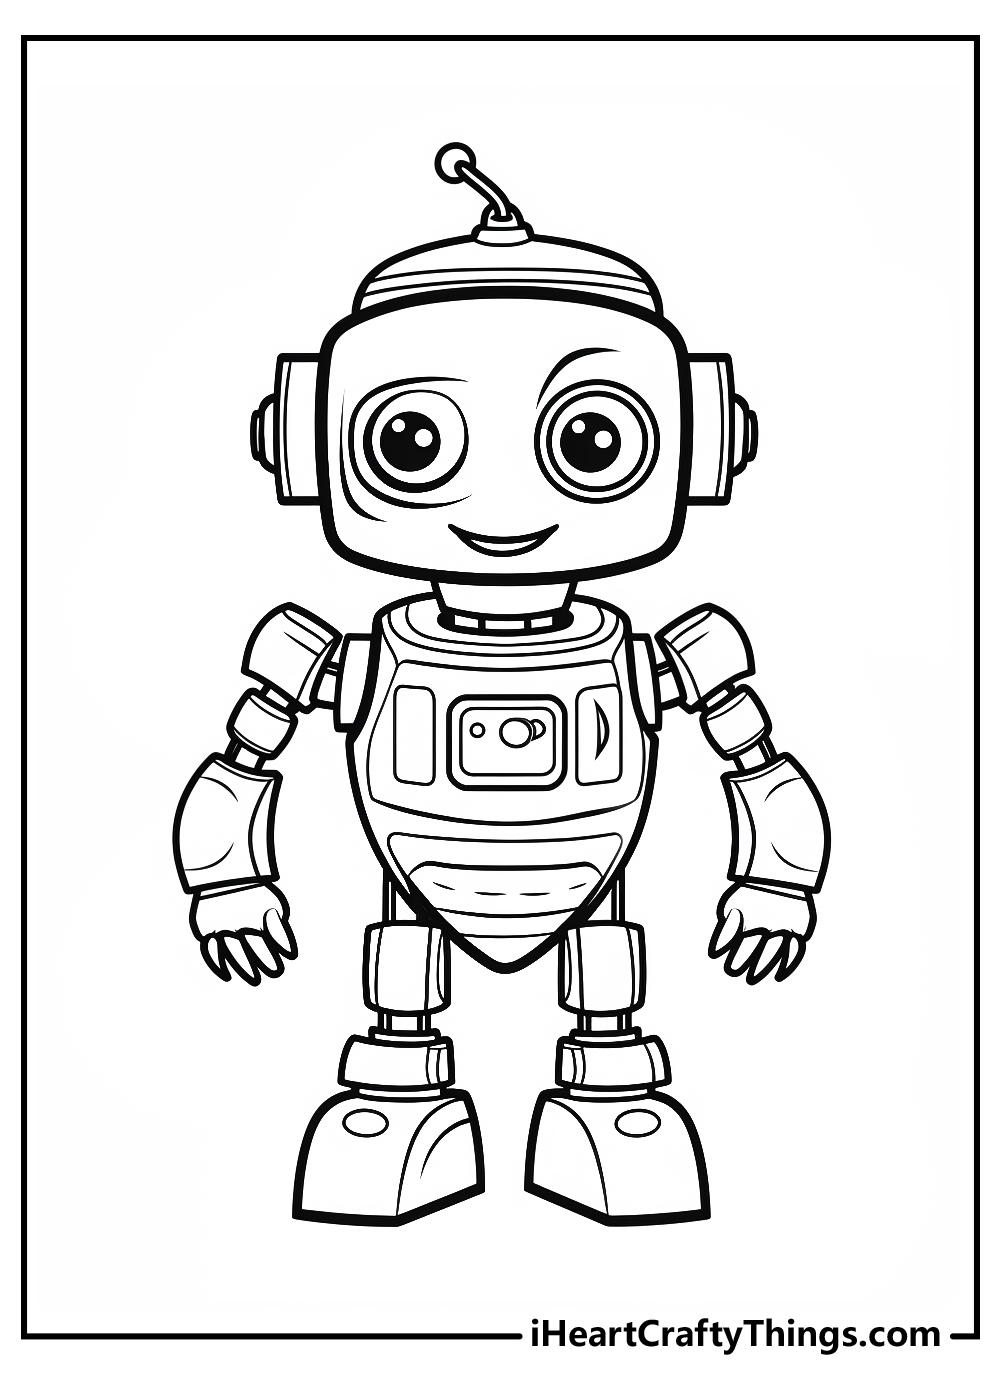 Premium Vector  Coloring pages for kids a4 page robot theme